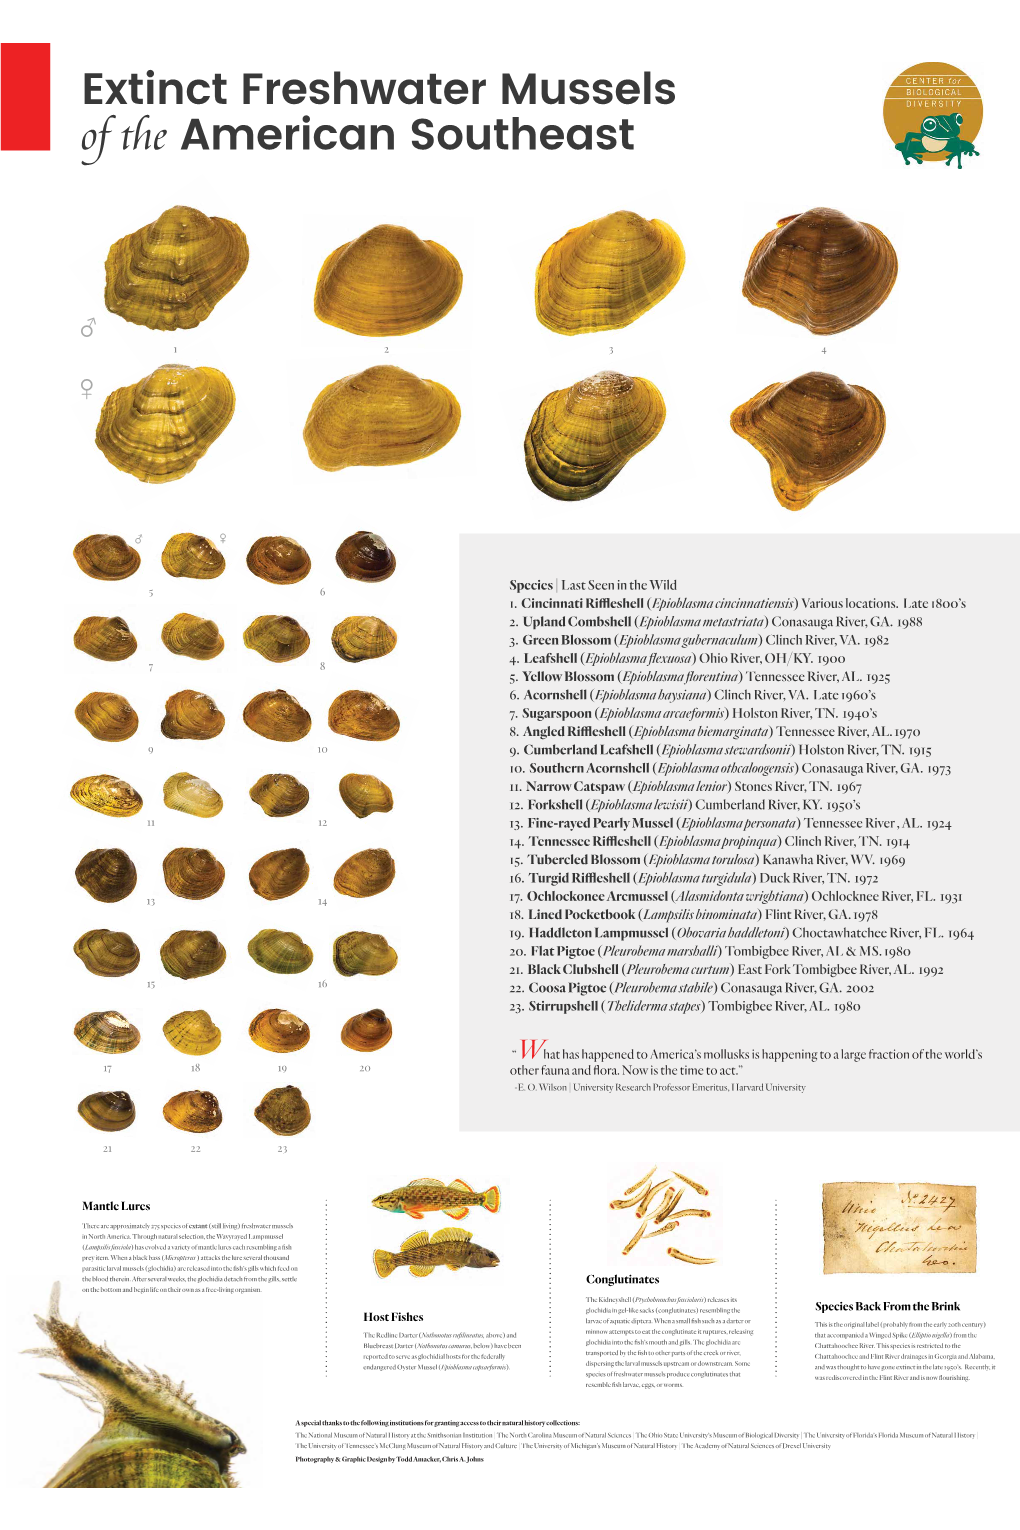 Extinct Mussels of the American Southeast